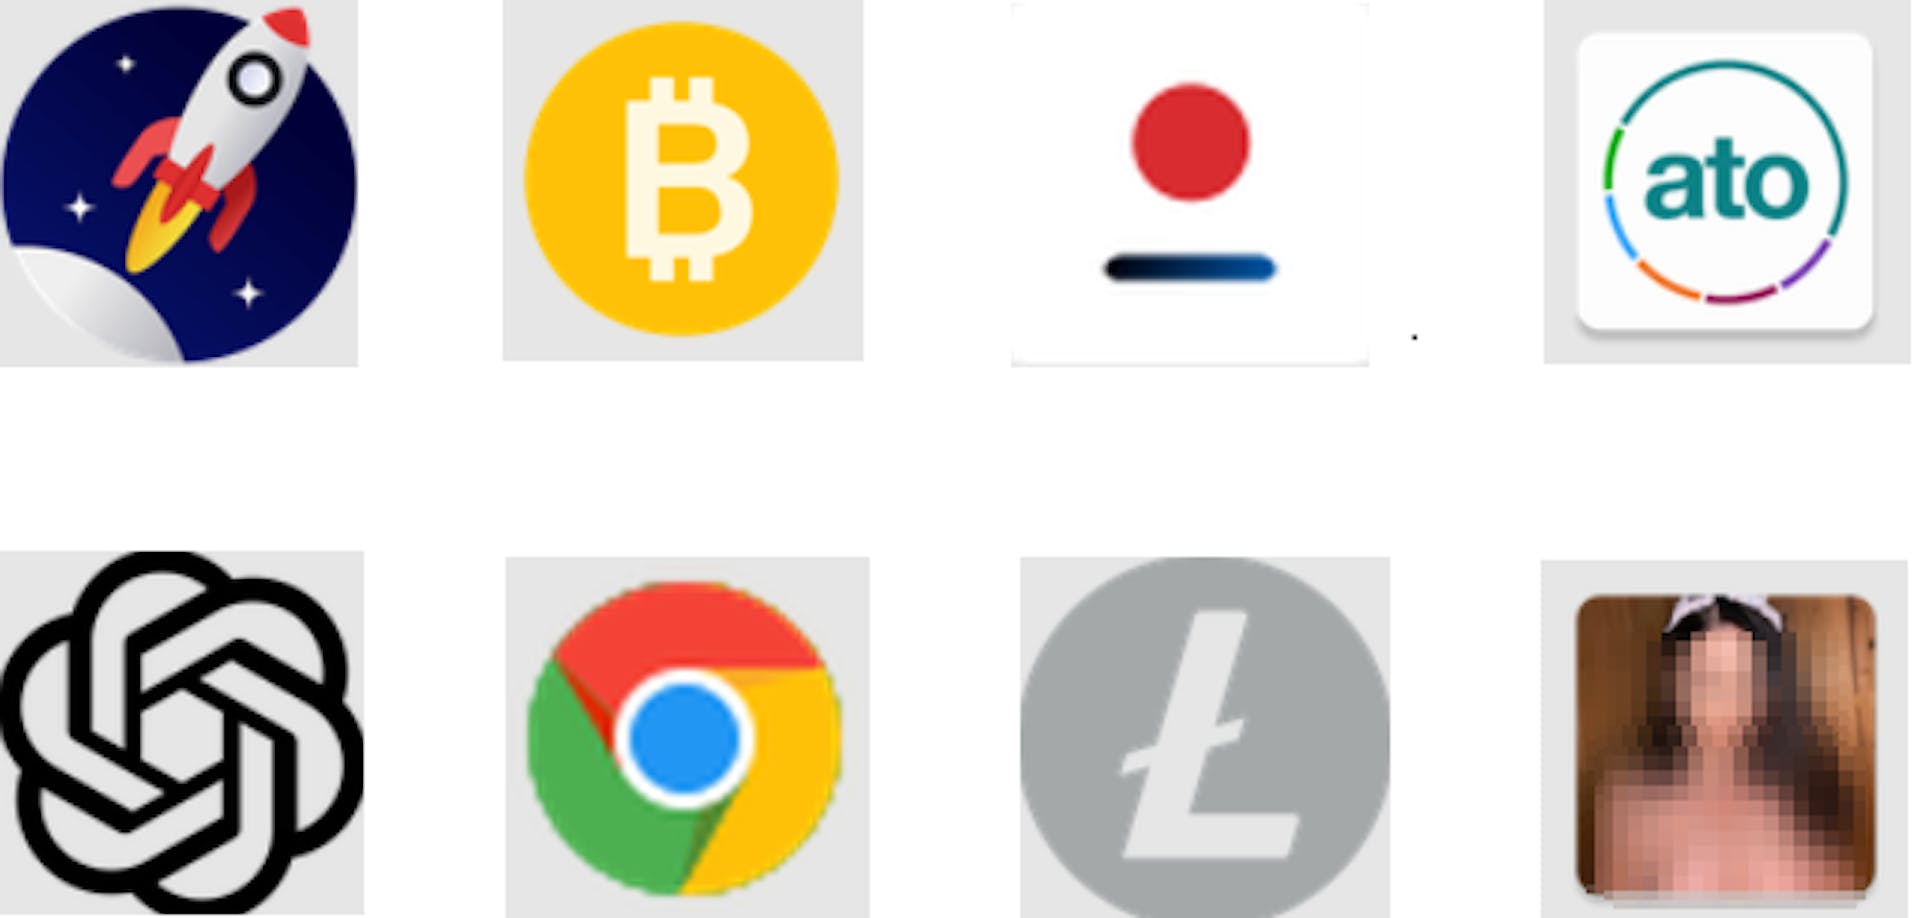 Some icons used by Chameleon. Image by Cyble